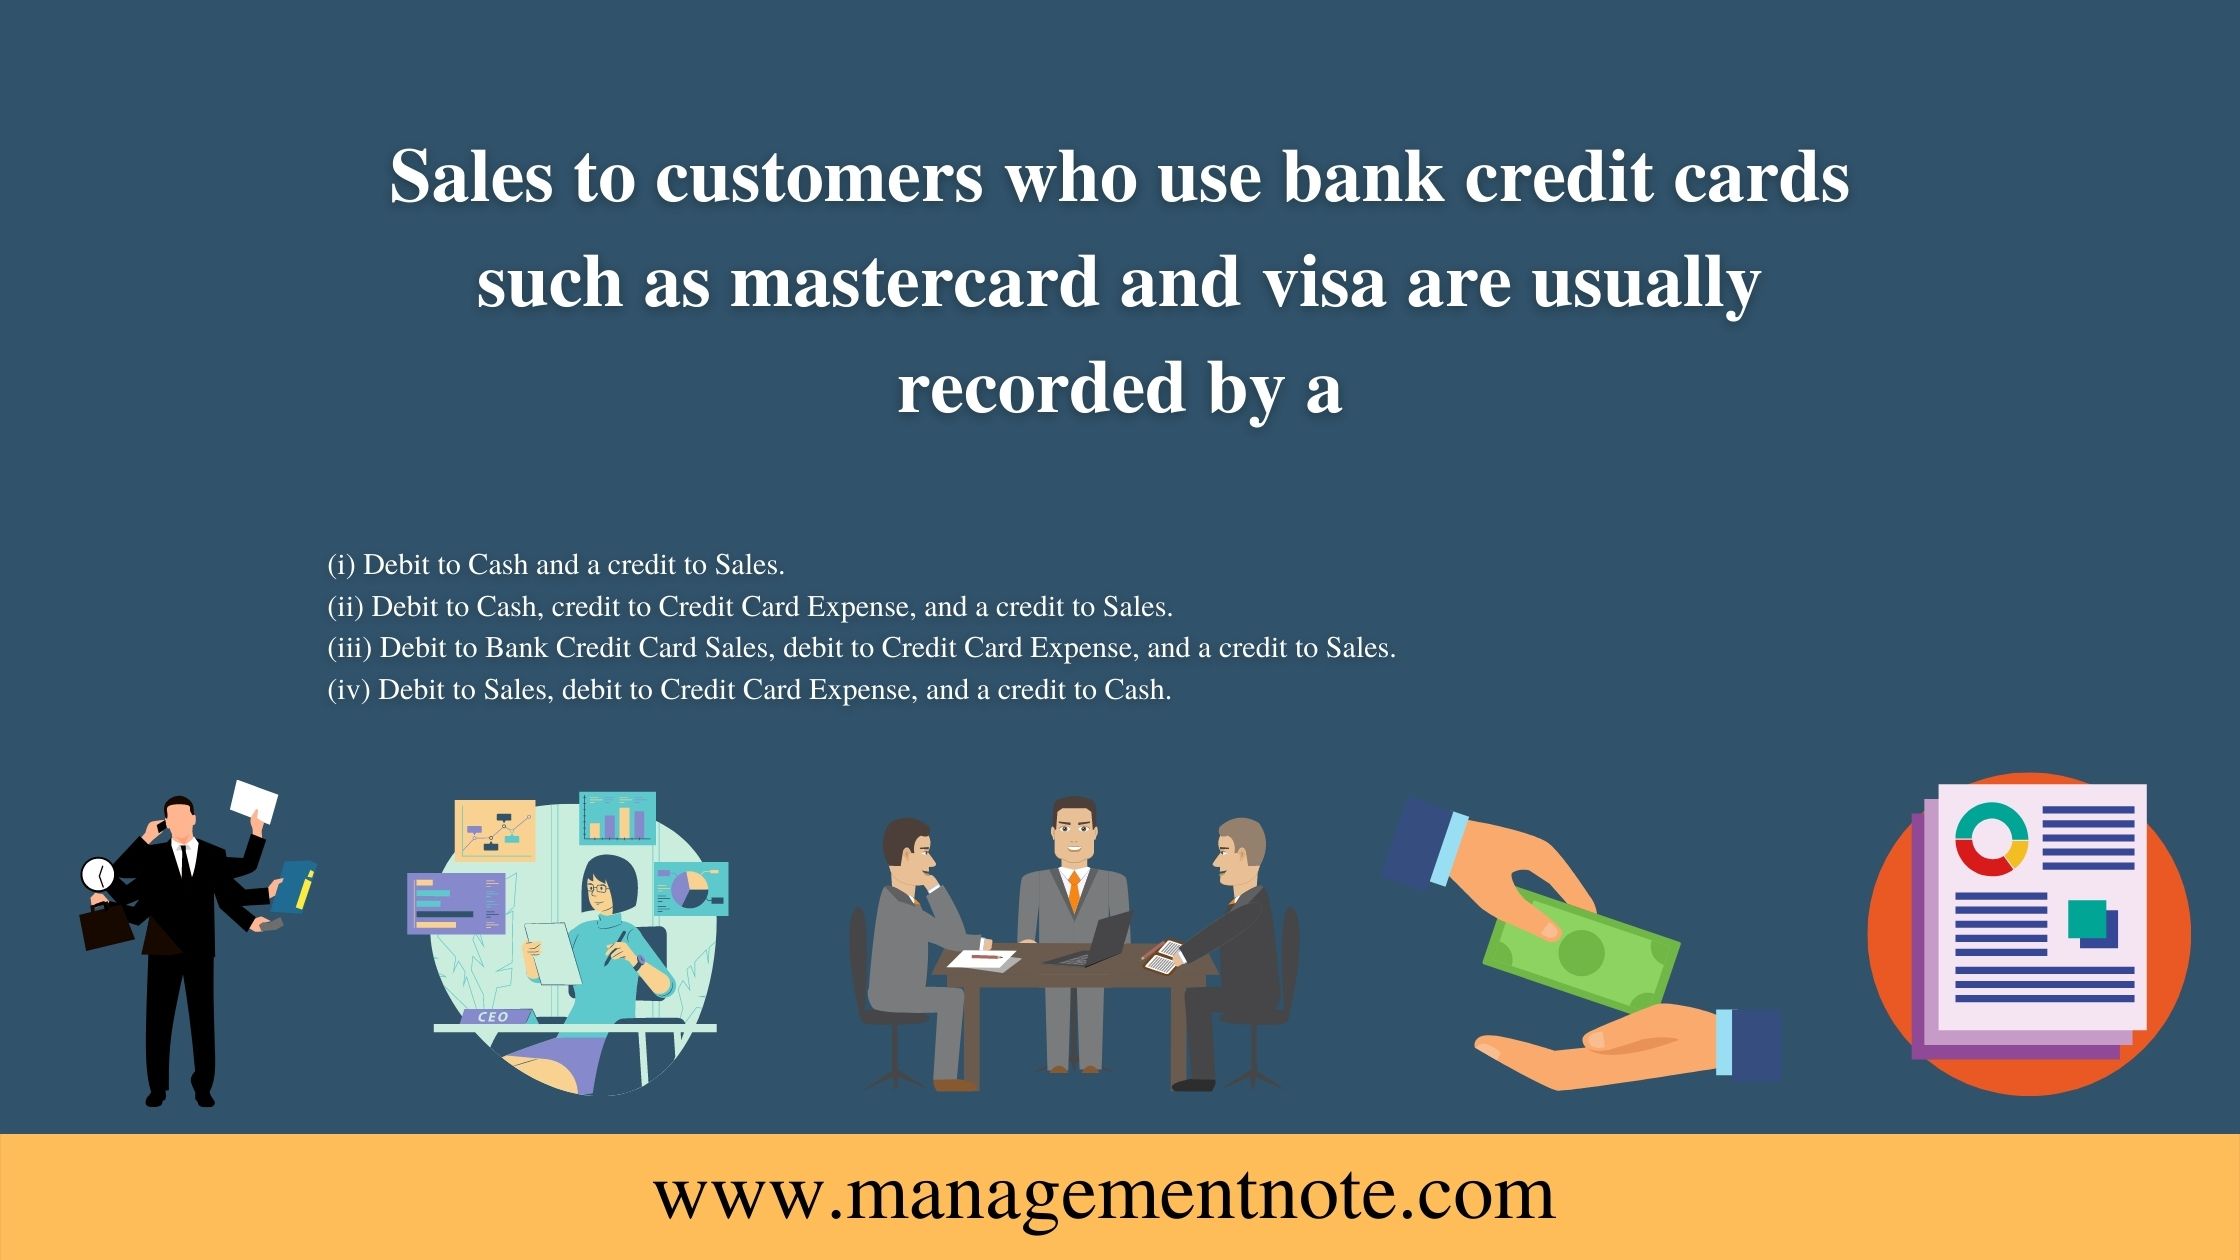 sales to customers who use bank credit cards, such as mastercard and visa, are generally treated as